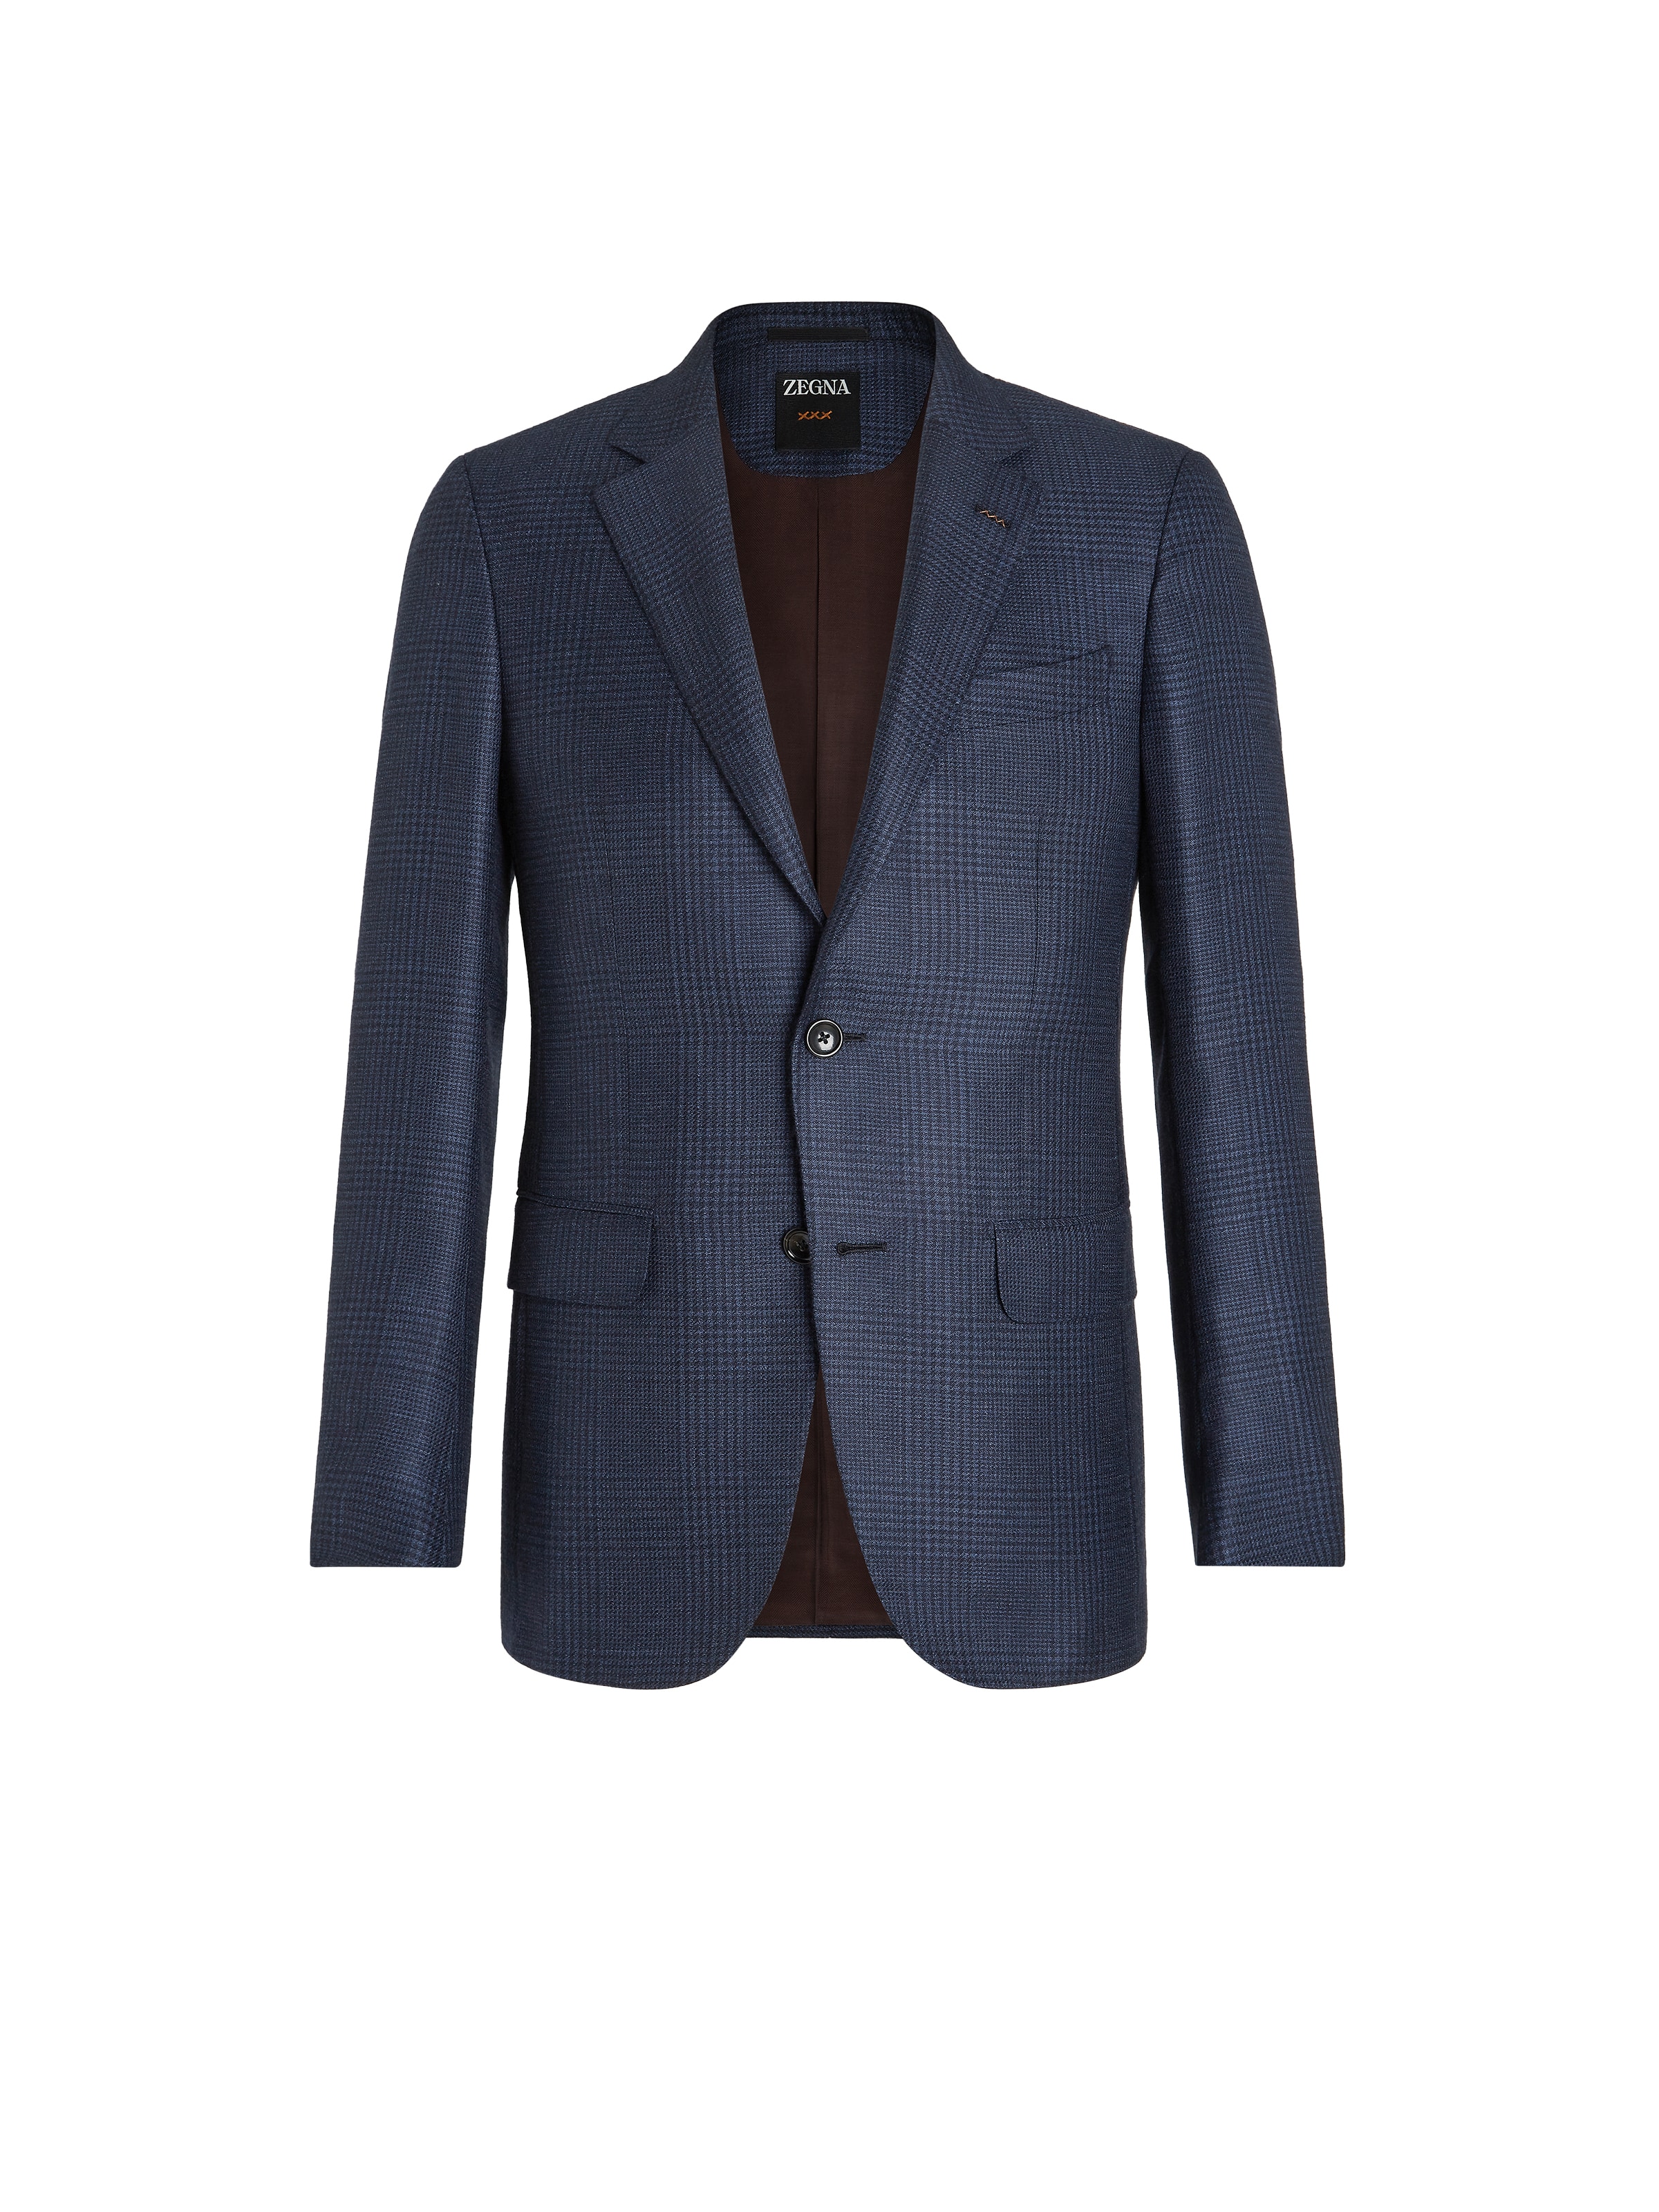 ZEGNA BLUE AND NAVY PRINCE OF WALES CASHMERE AND SILK JACKET